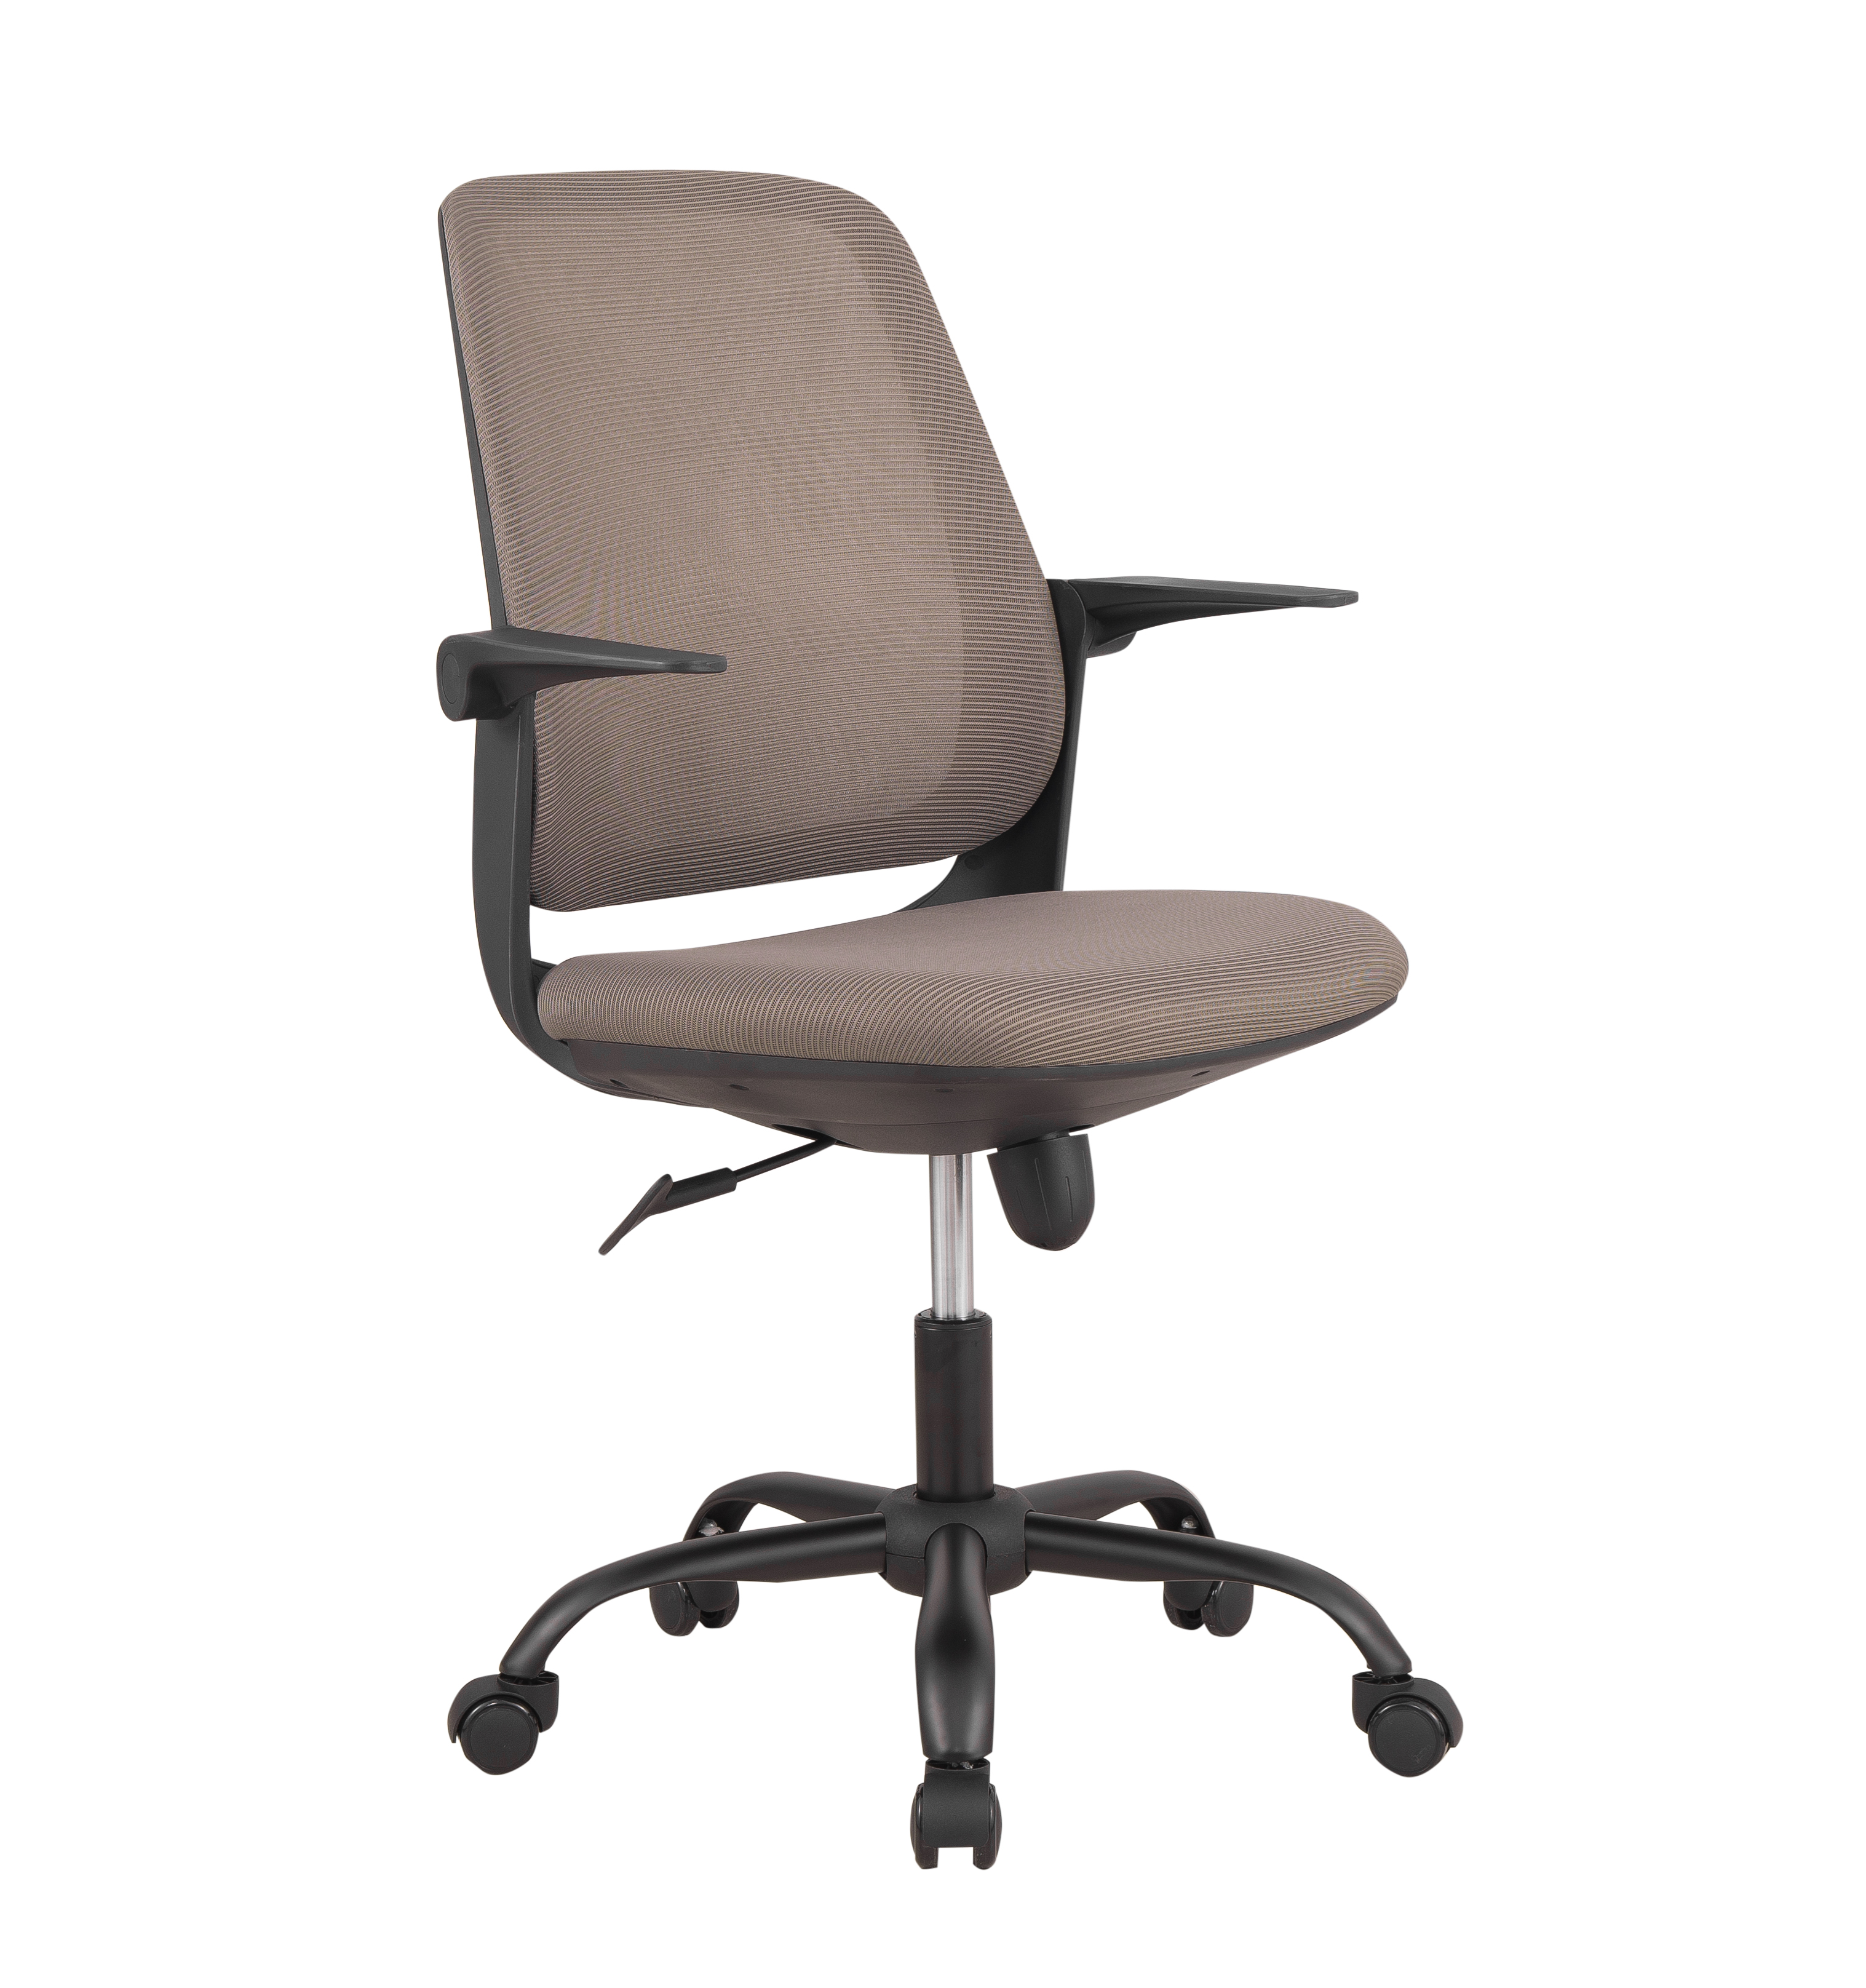 2020 New design Office Chair Computer Chair for staff MS7008GATL-BK